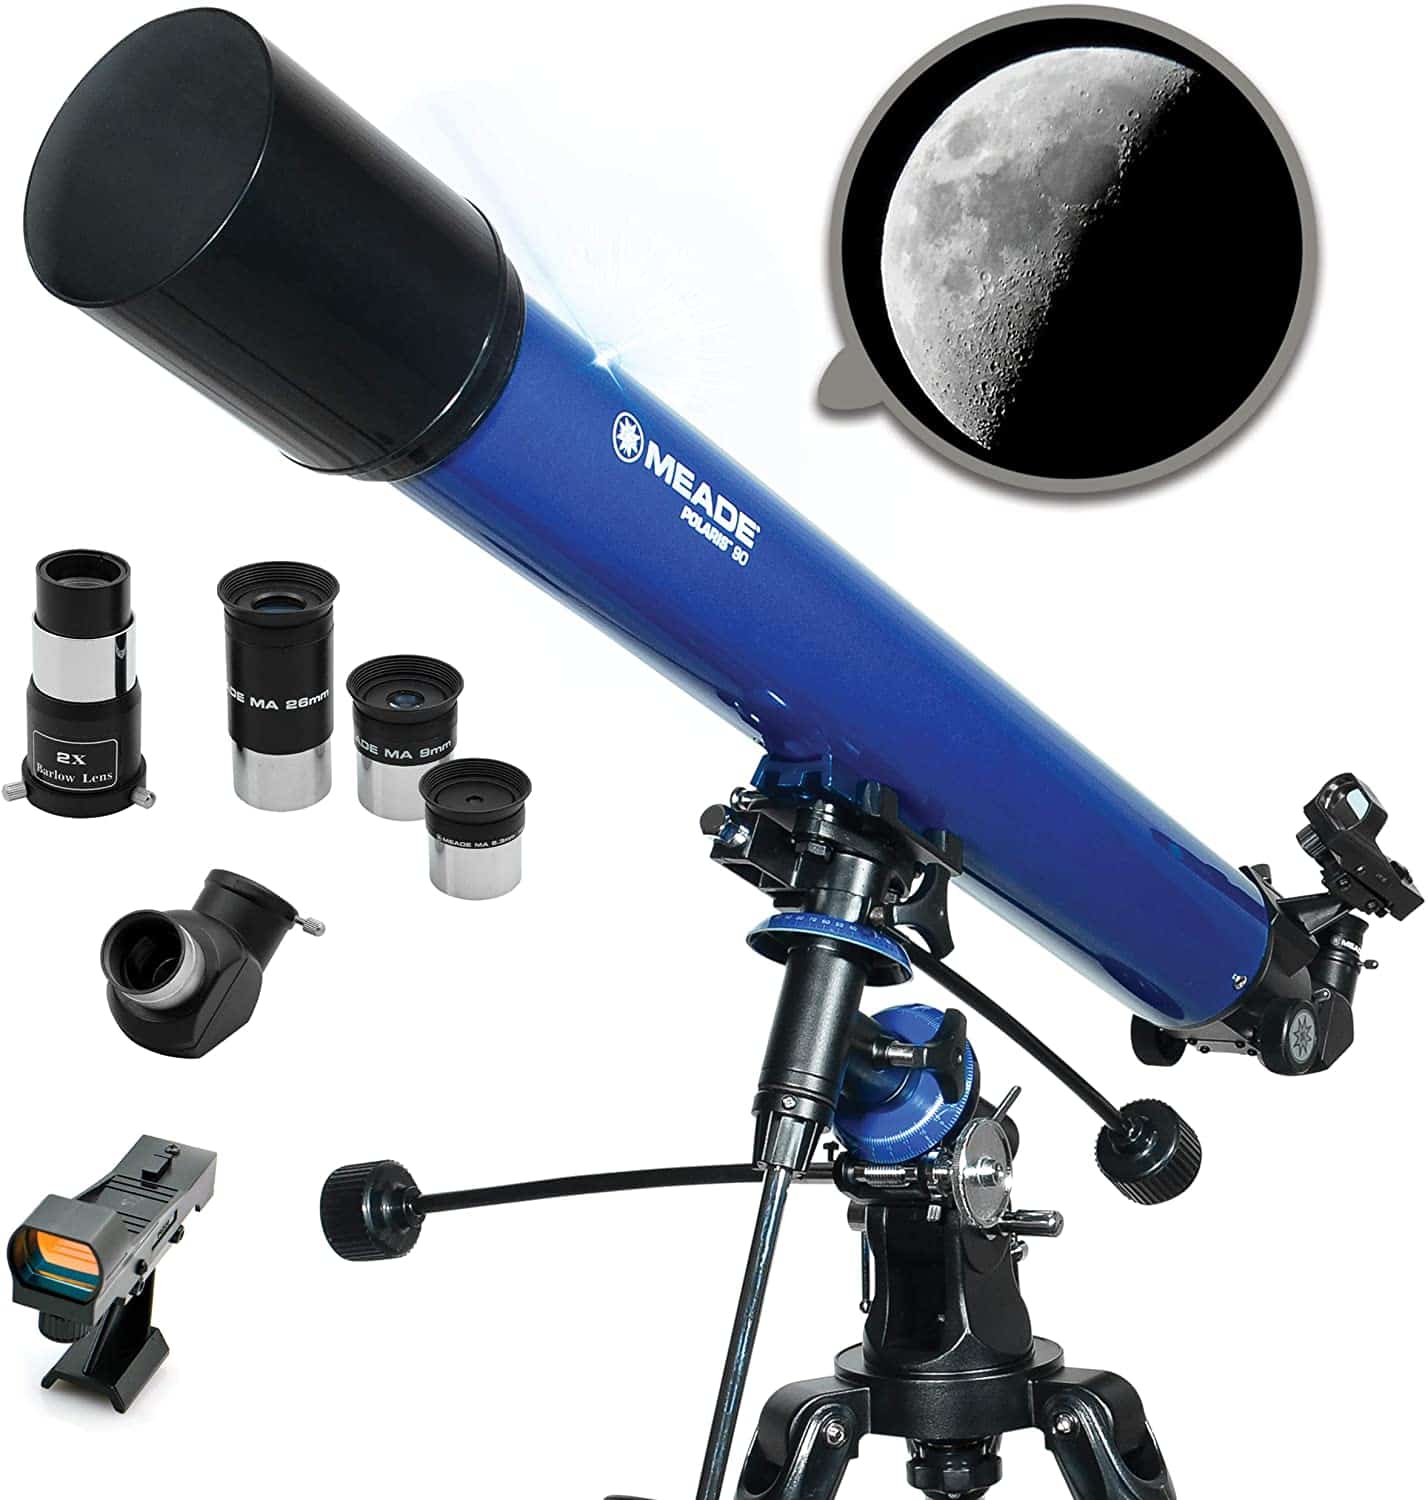 Things to consider before choosing Telescopes